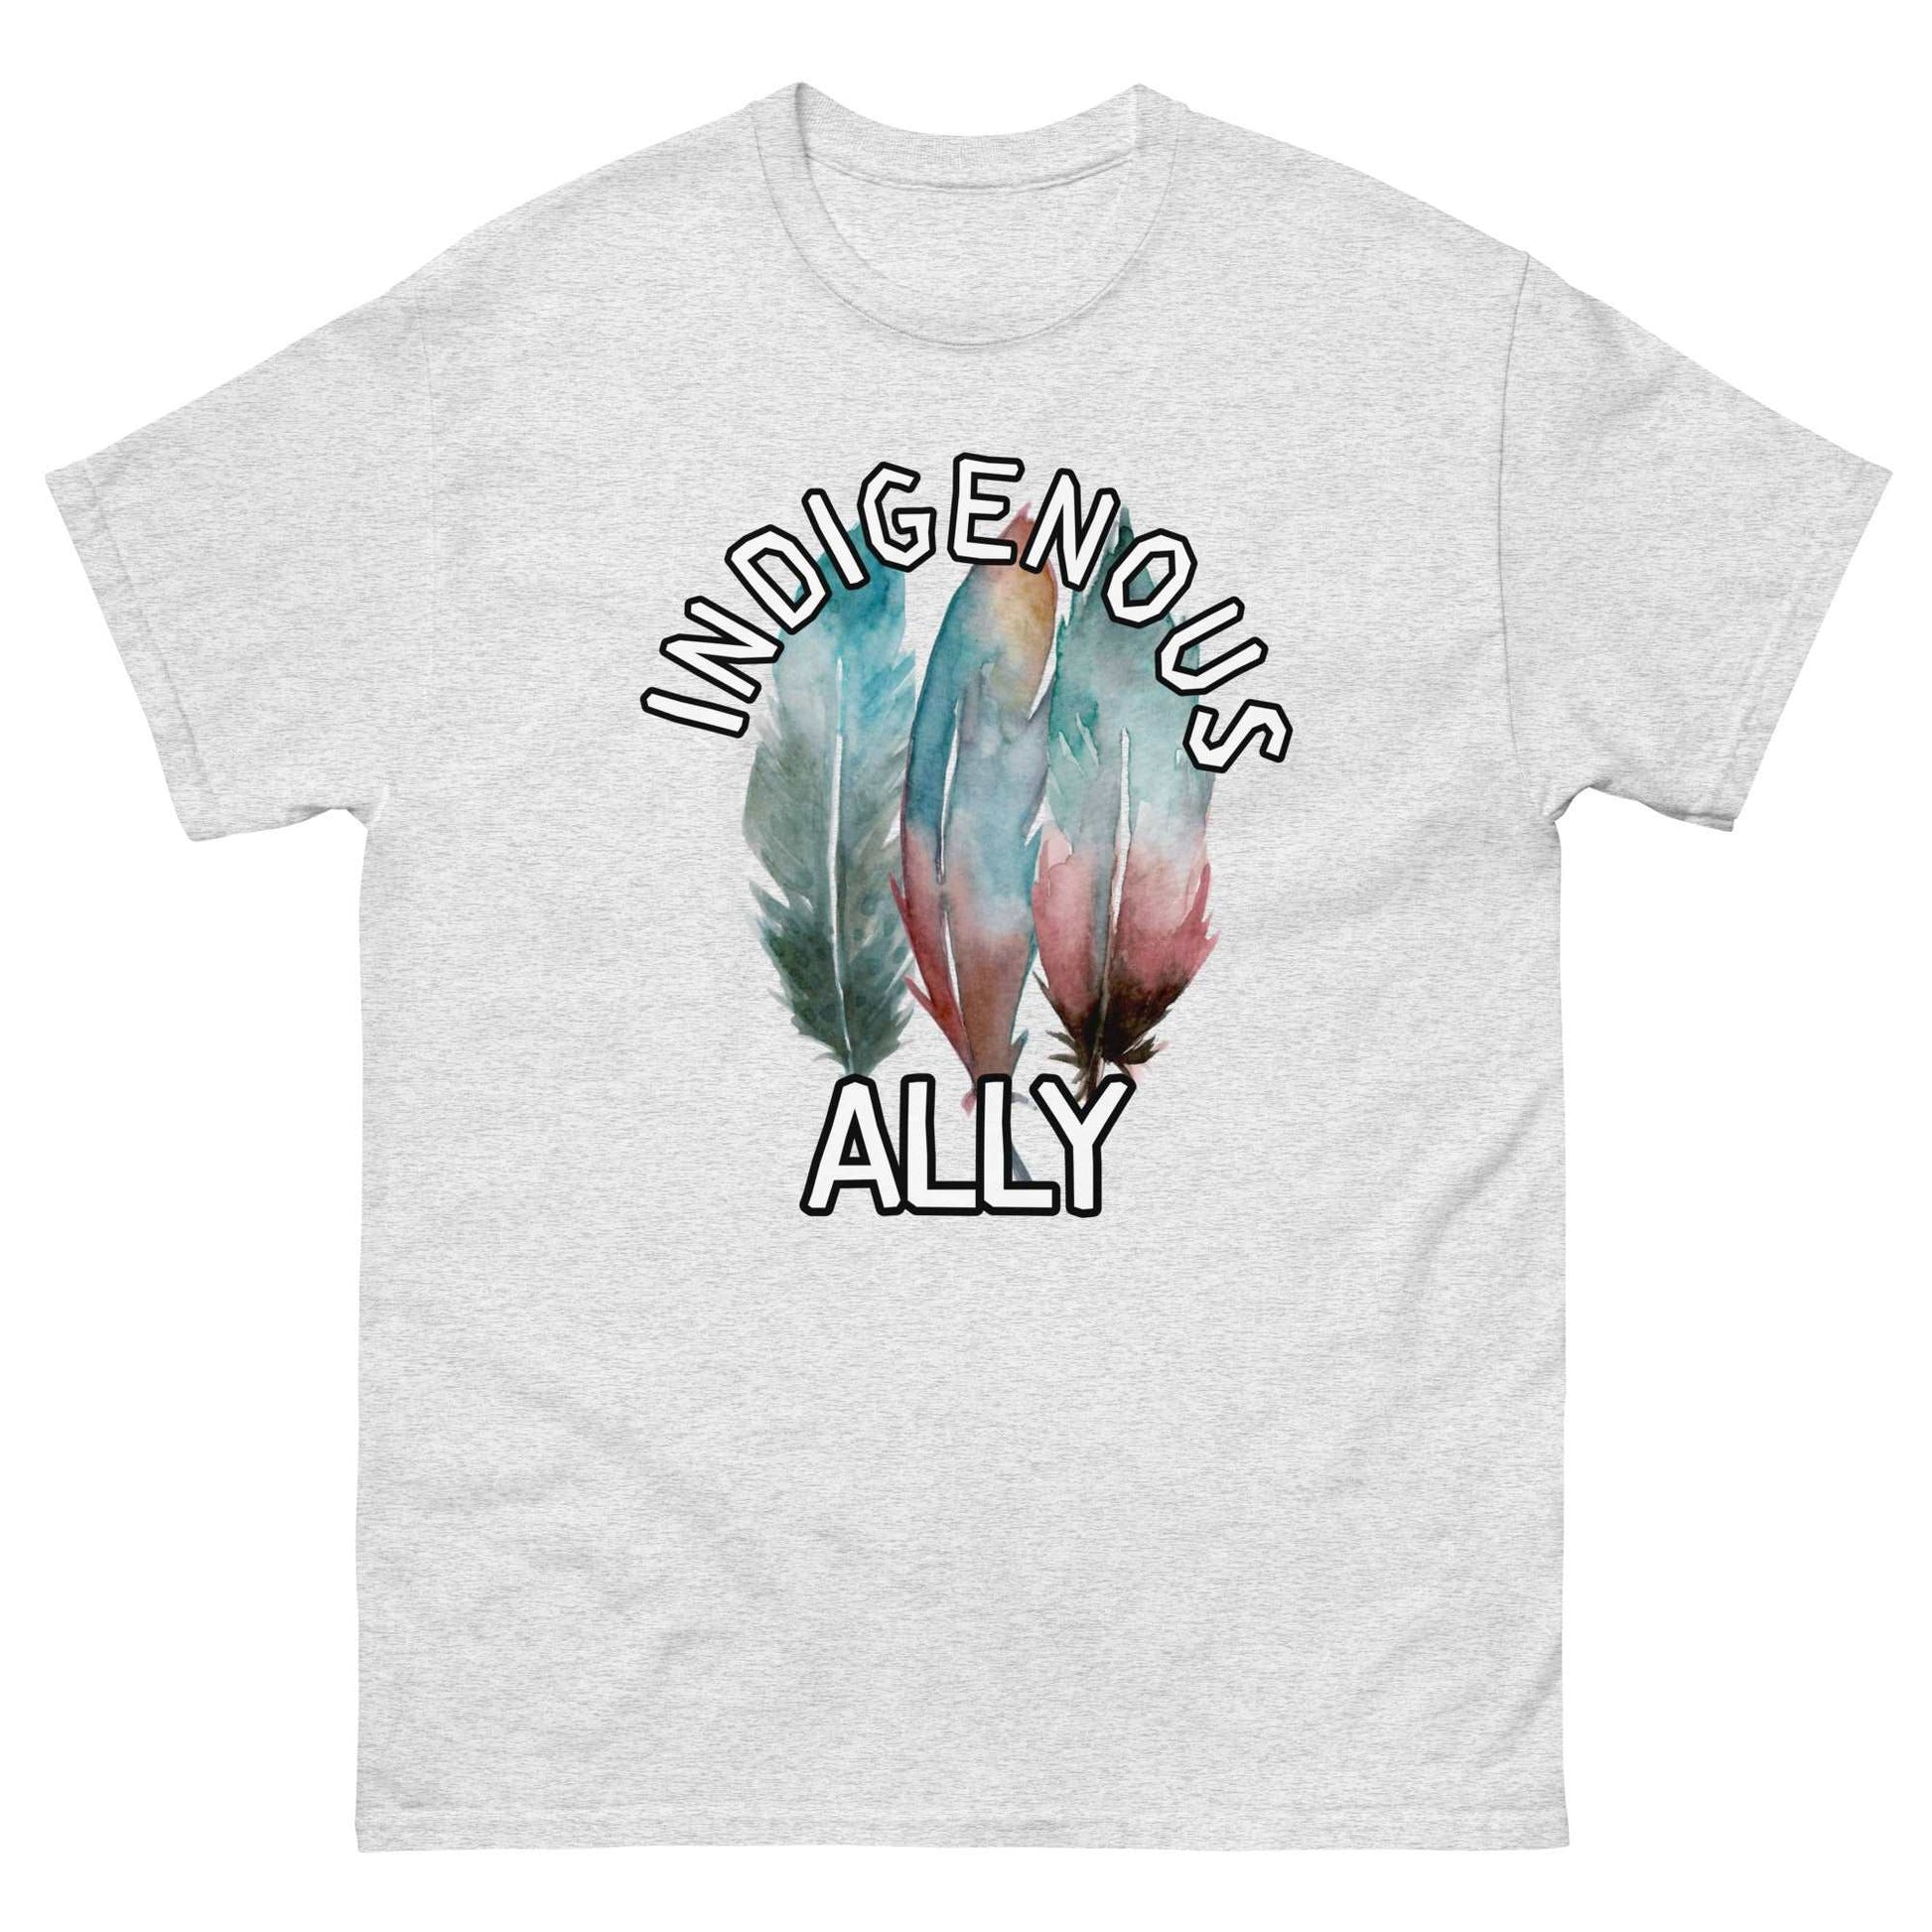 Indigenous Ally Tee